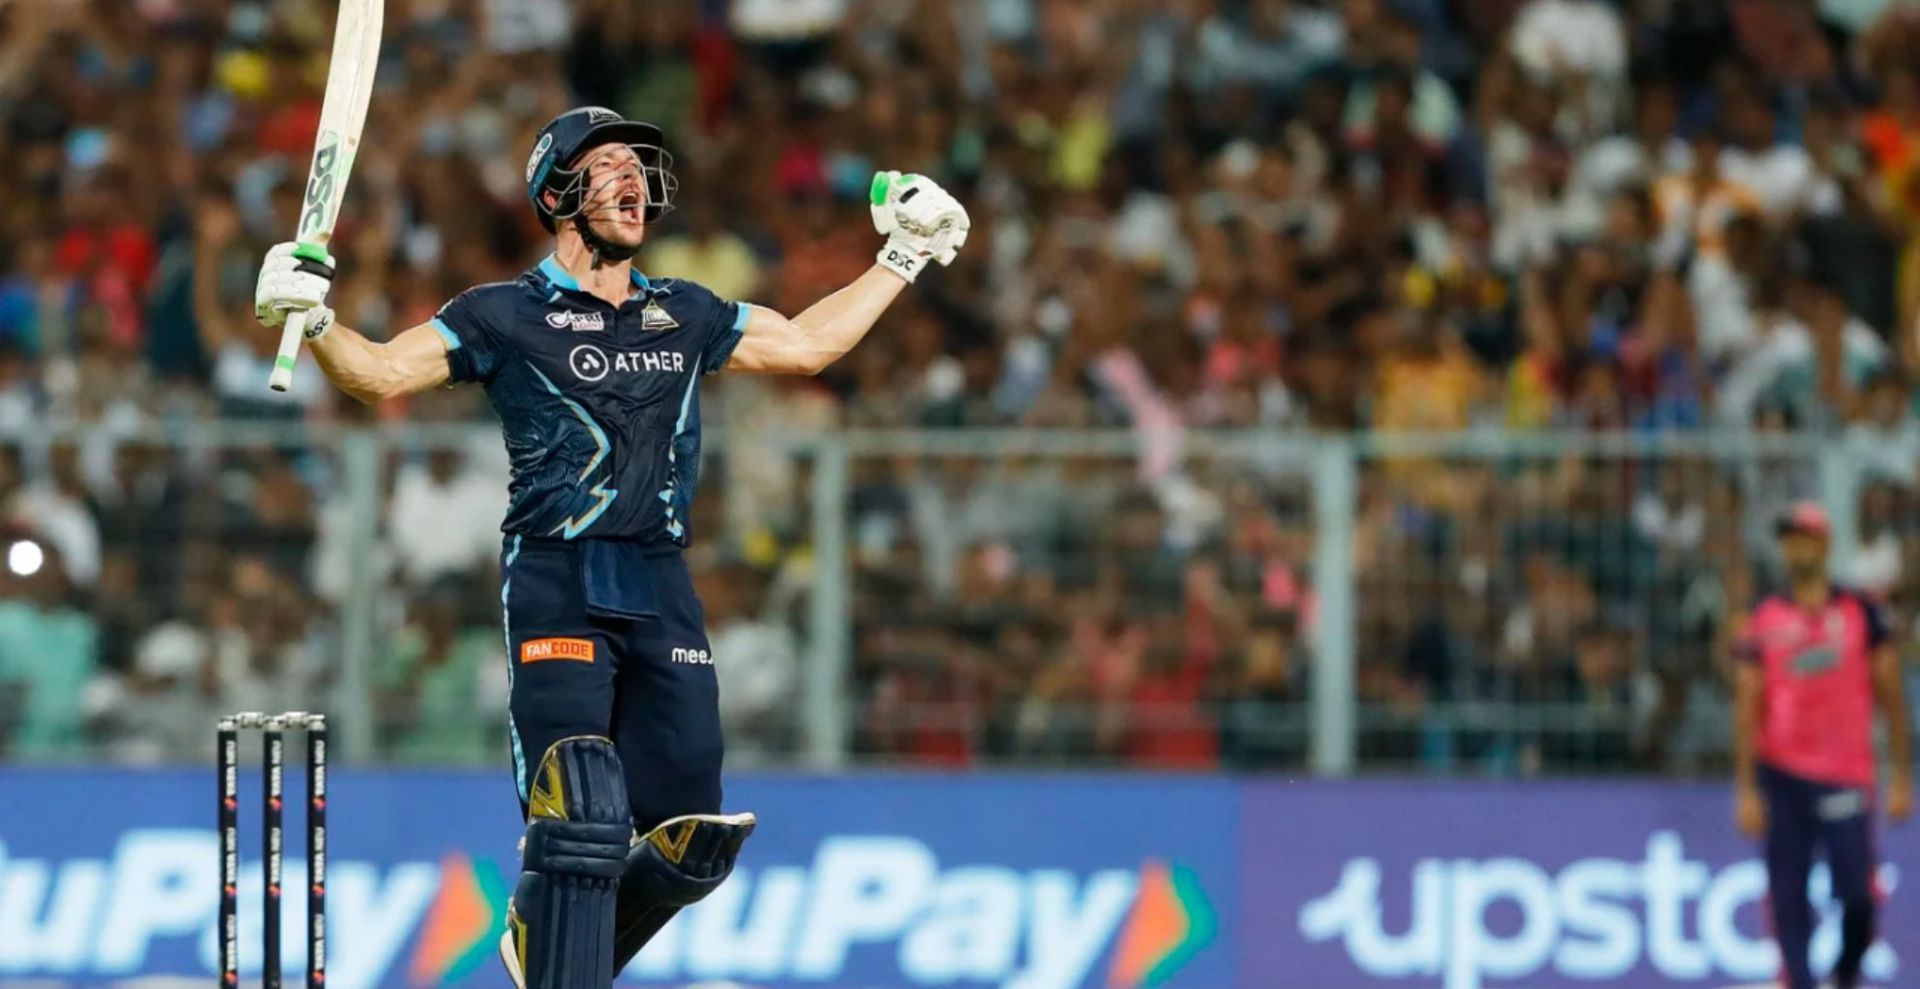 David Miller made telling contributions with the bat for Gujarat Titans in IPL 2022 (Credit: BCCI/IPL)